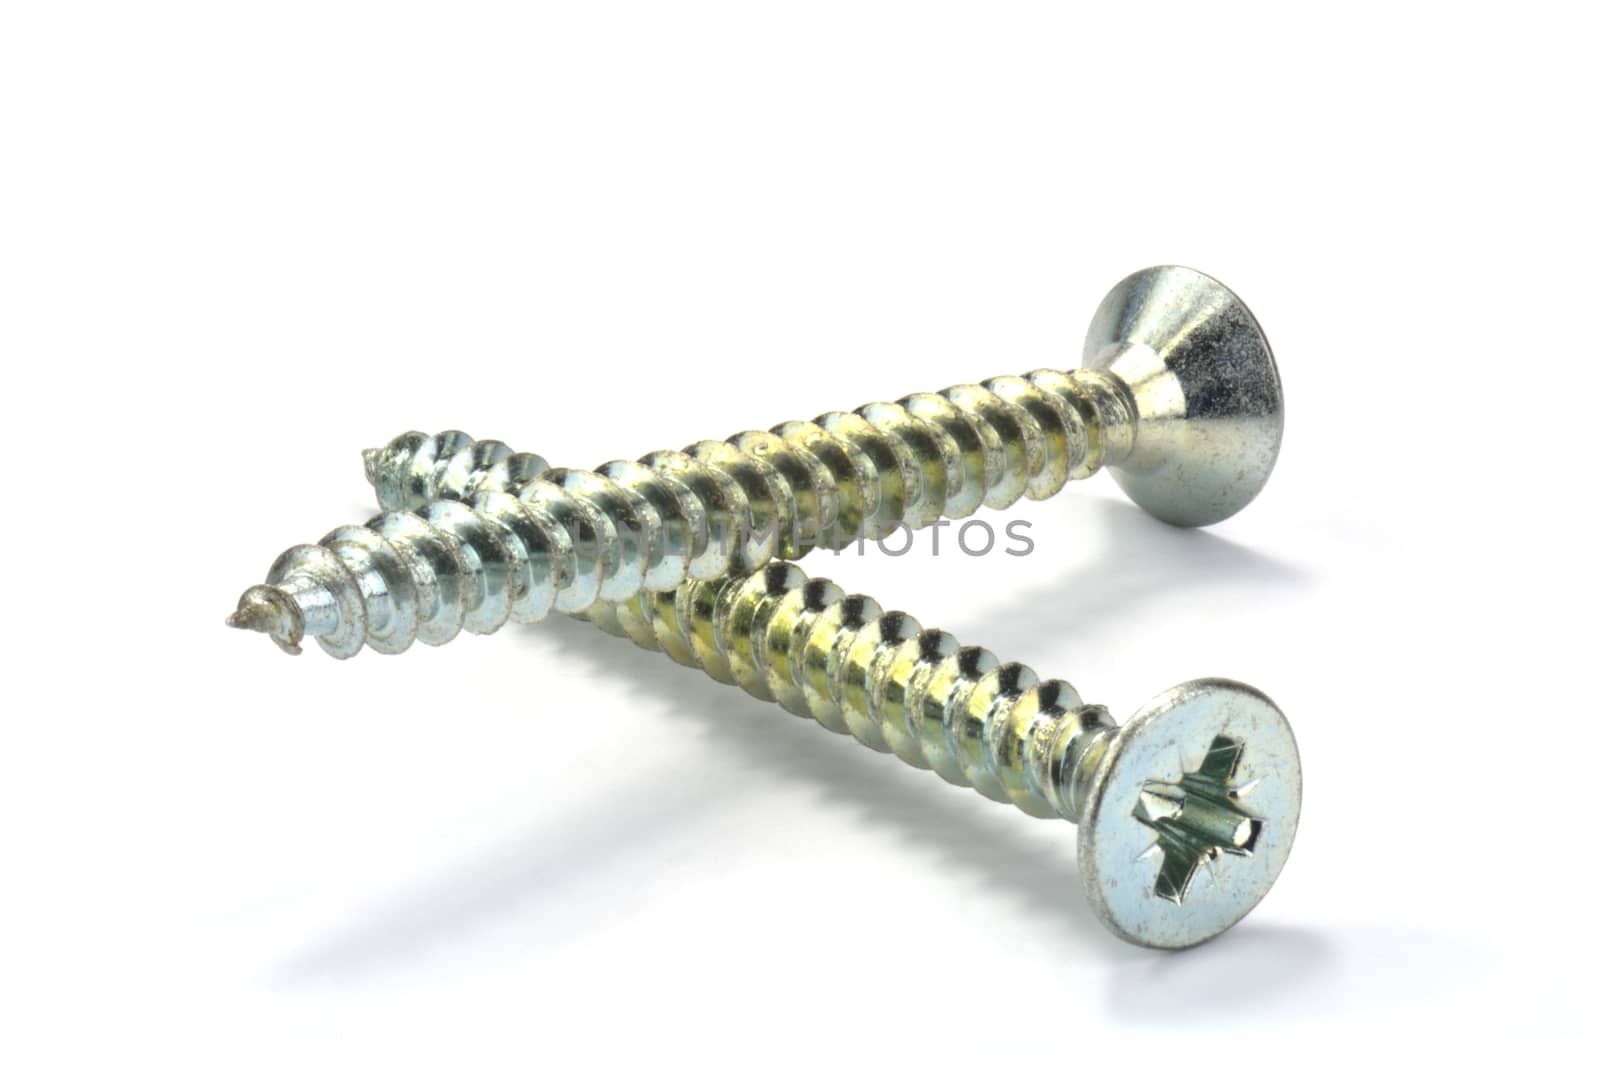 Two isolated Phillips screws